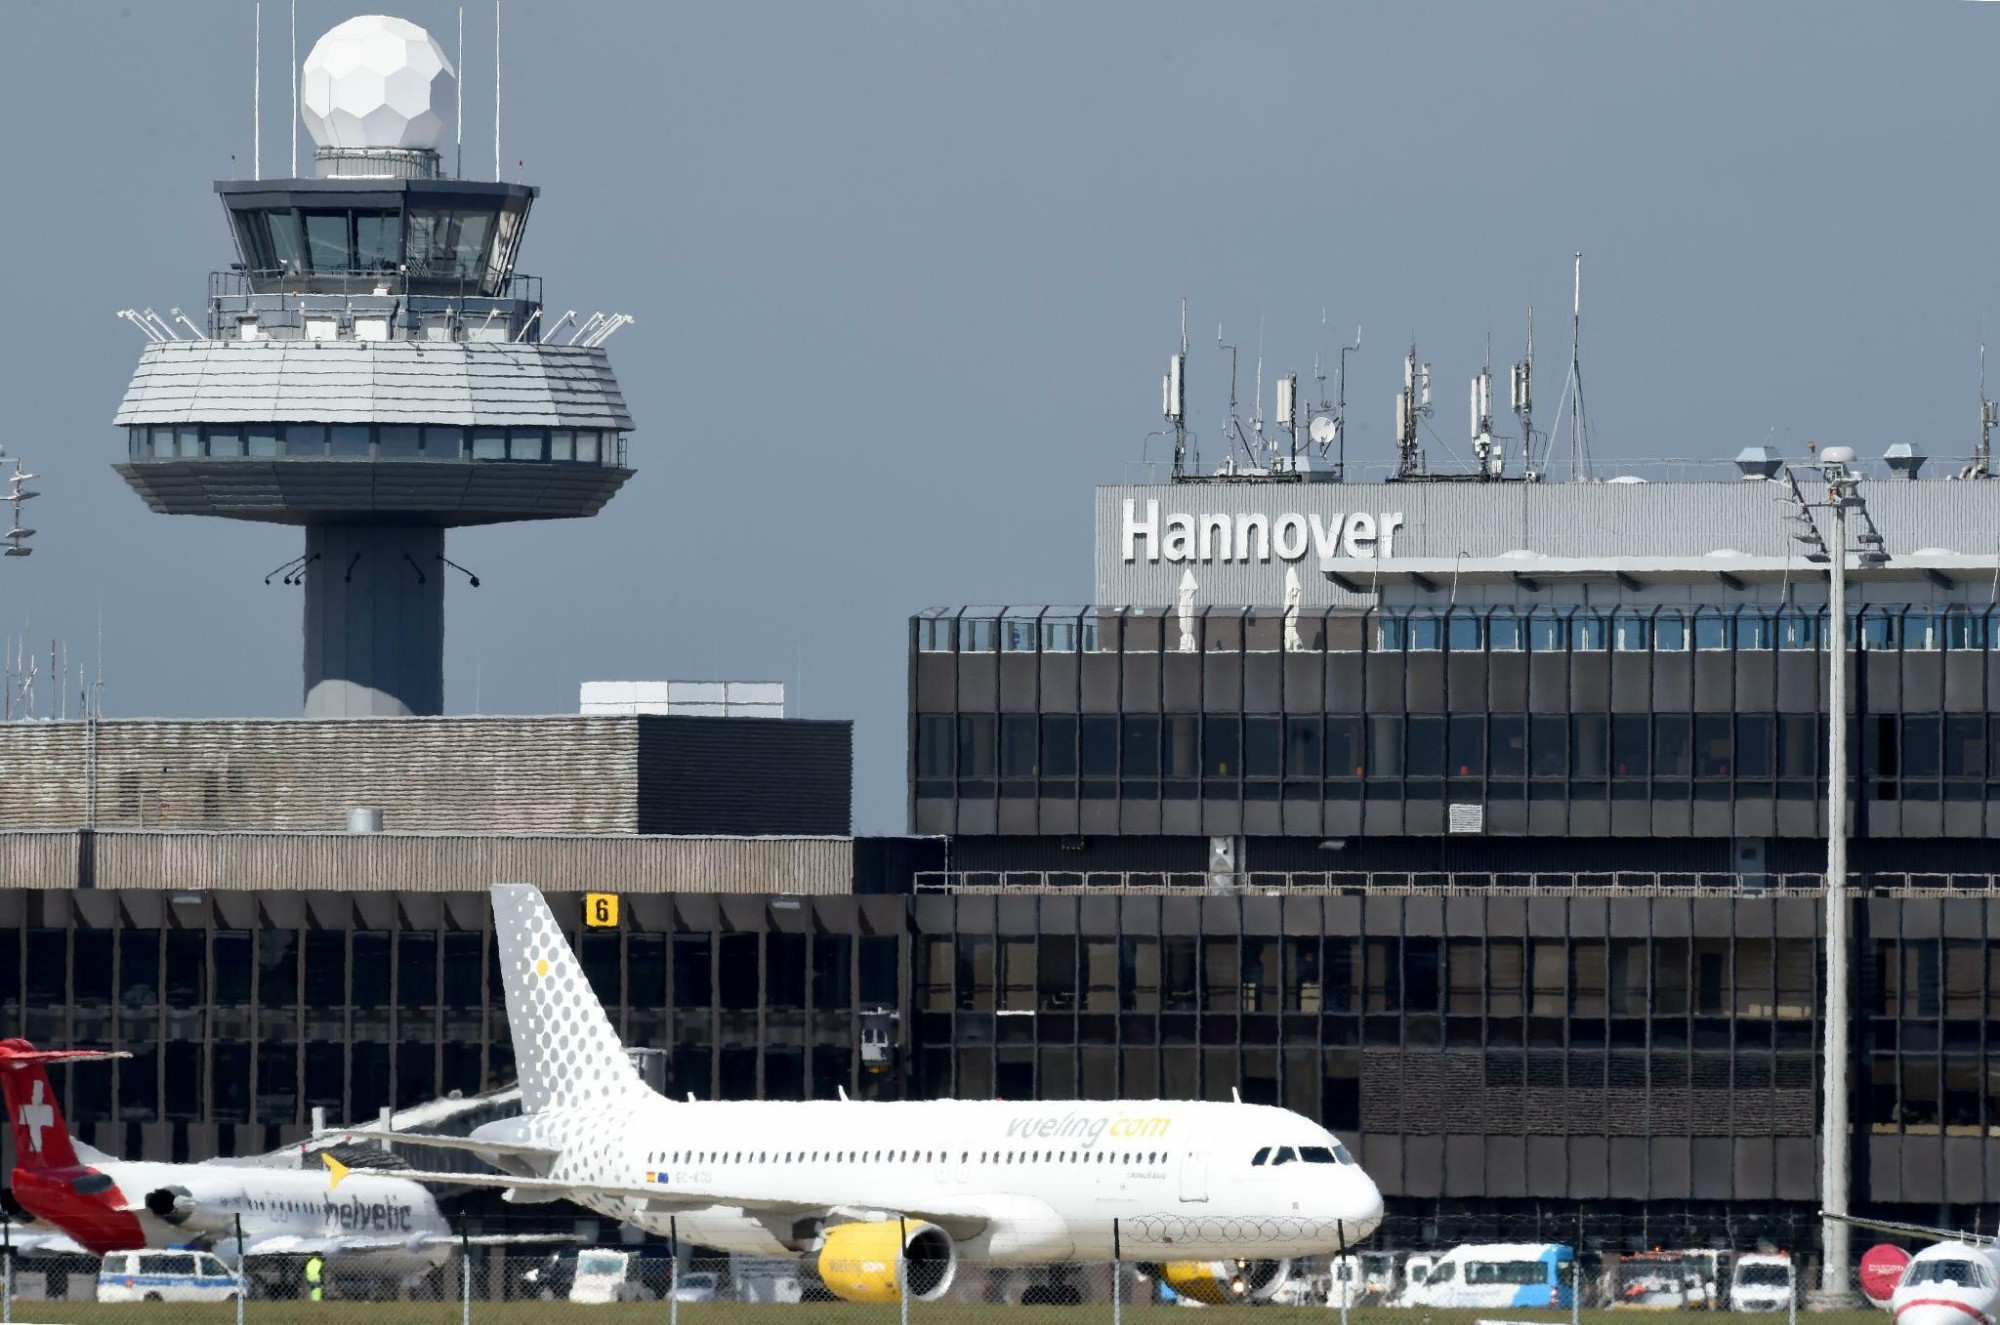 Airport Hannover